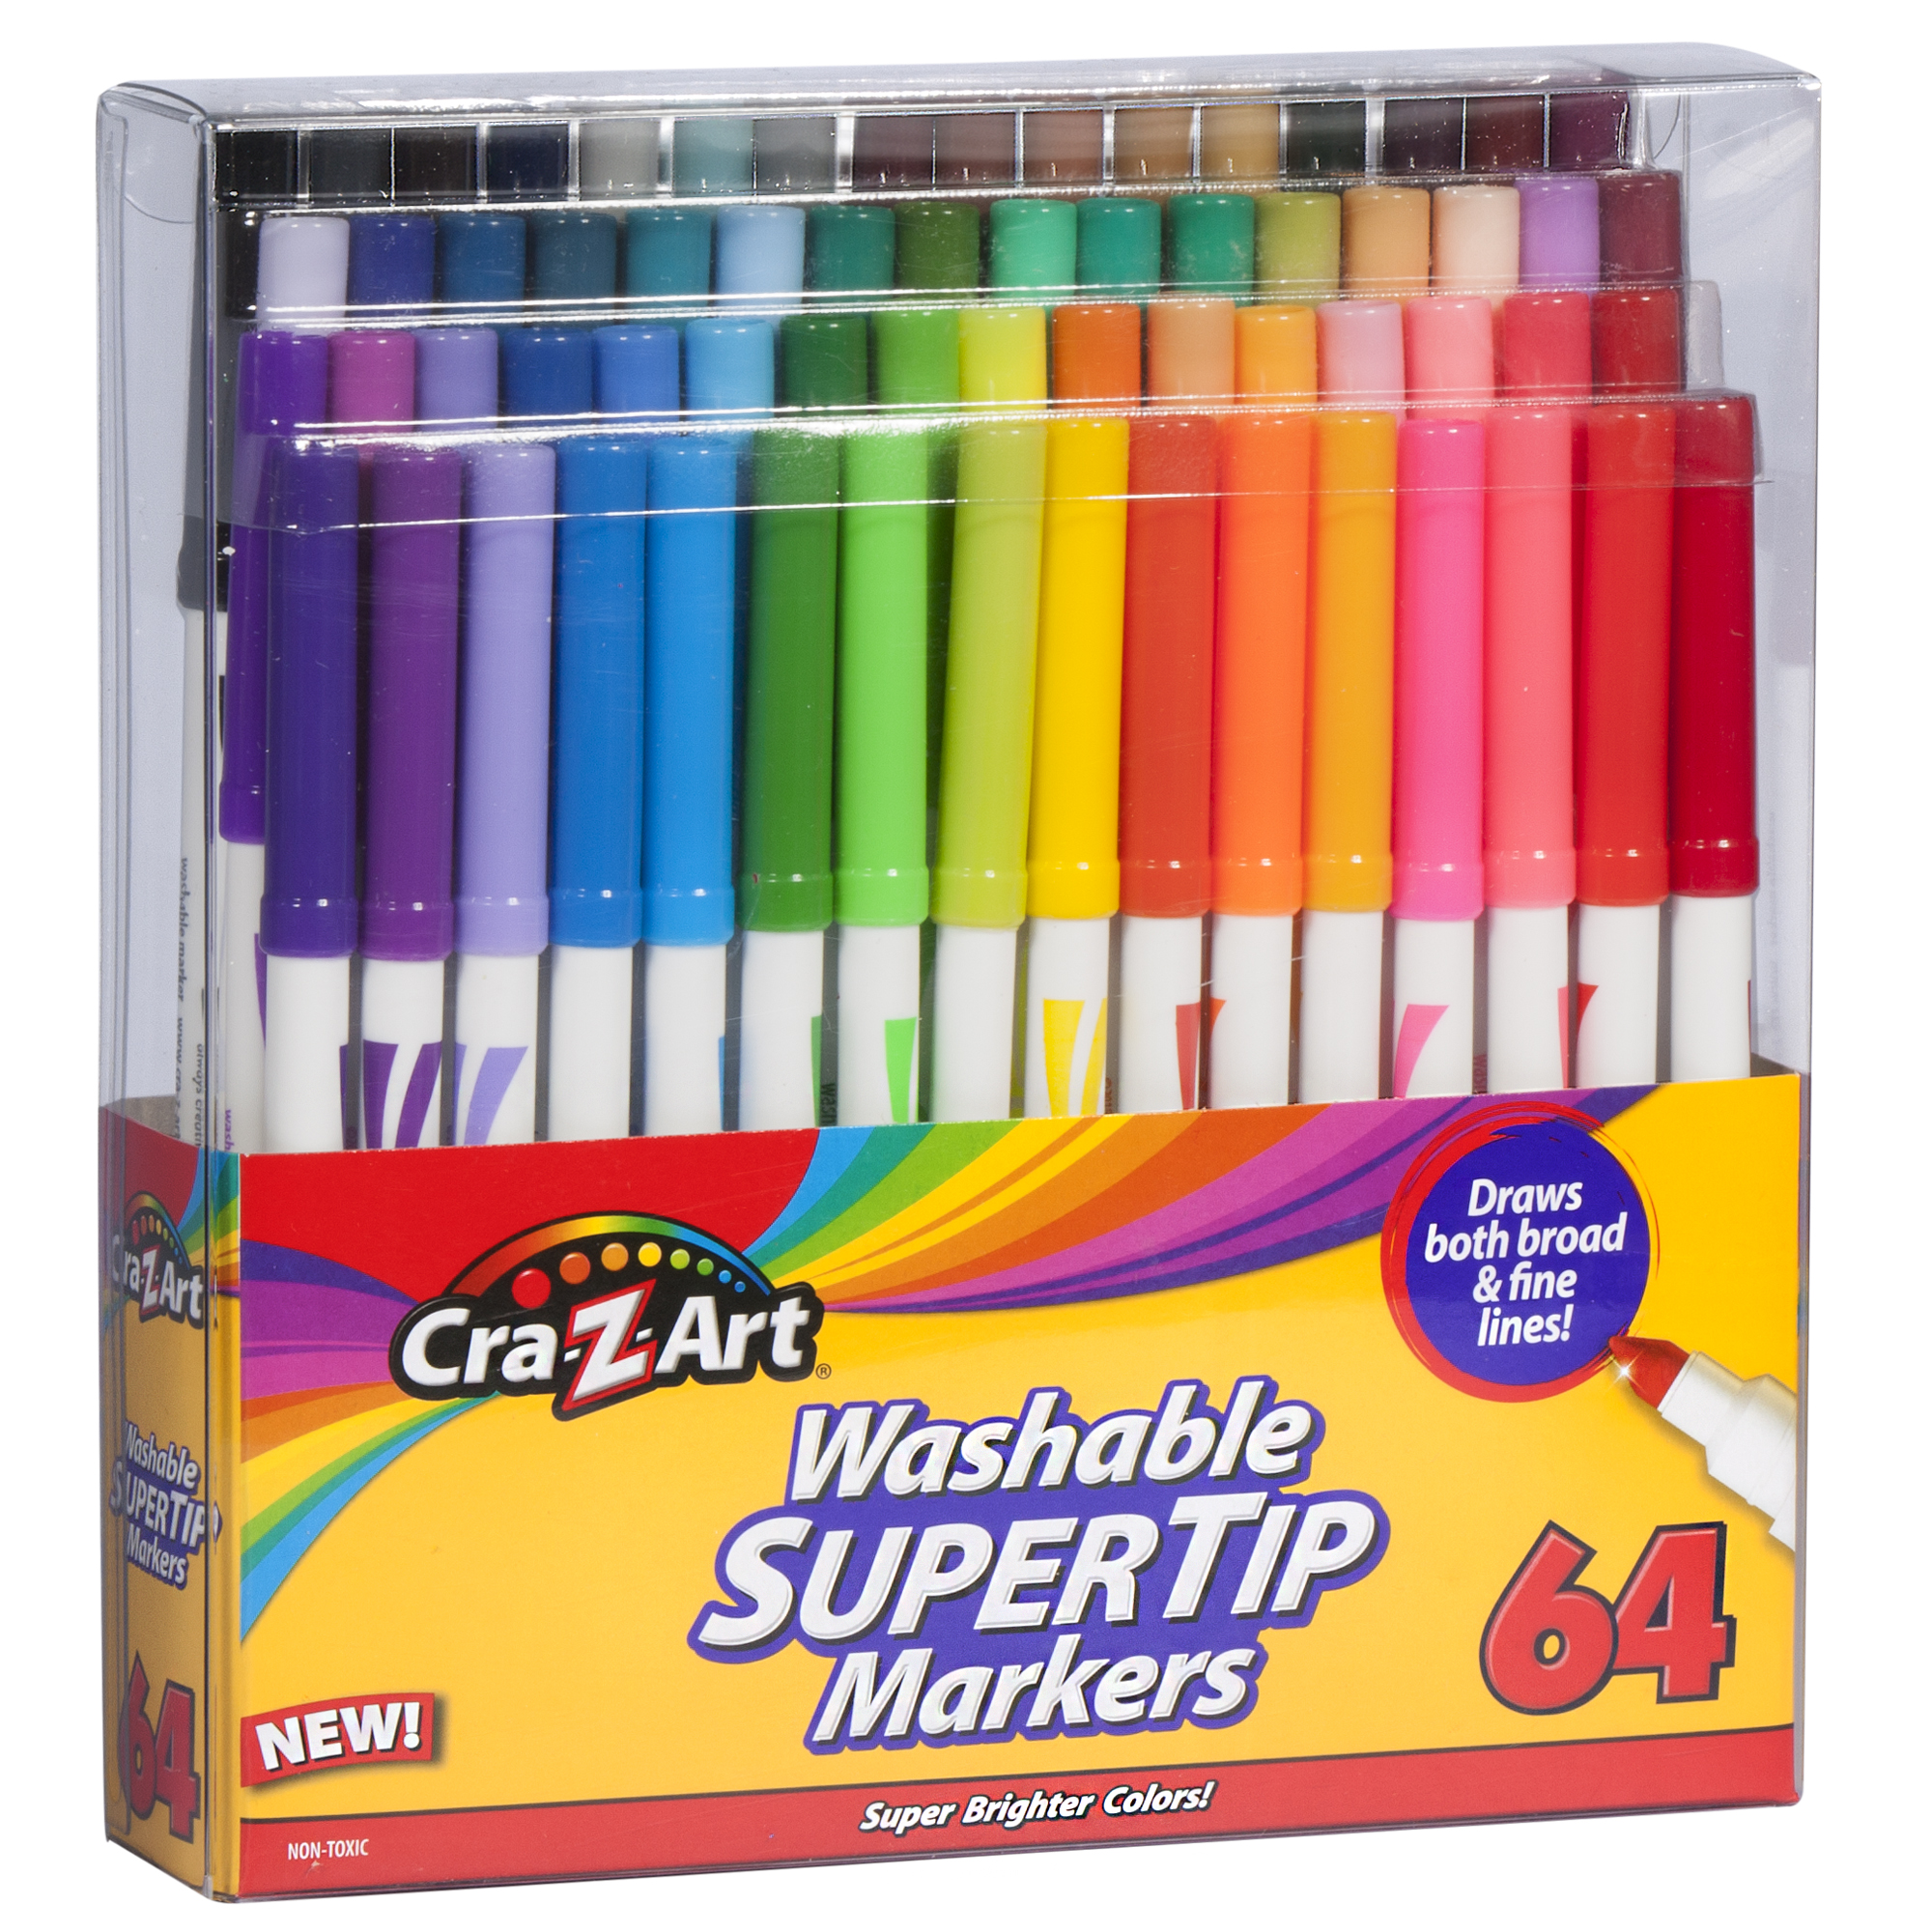 Cra-Z-Art Washable Super Tip Markers, 64 Count - image 3 of 10